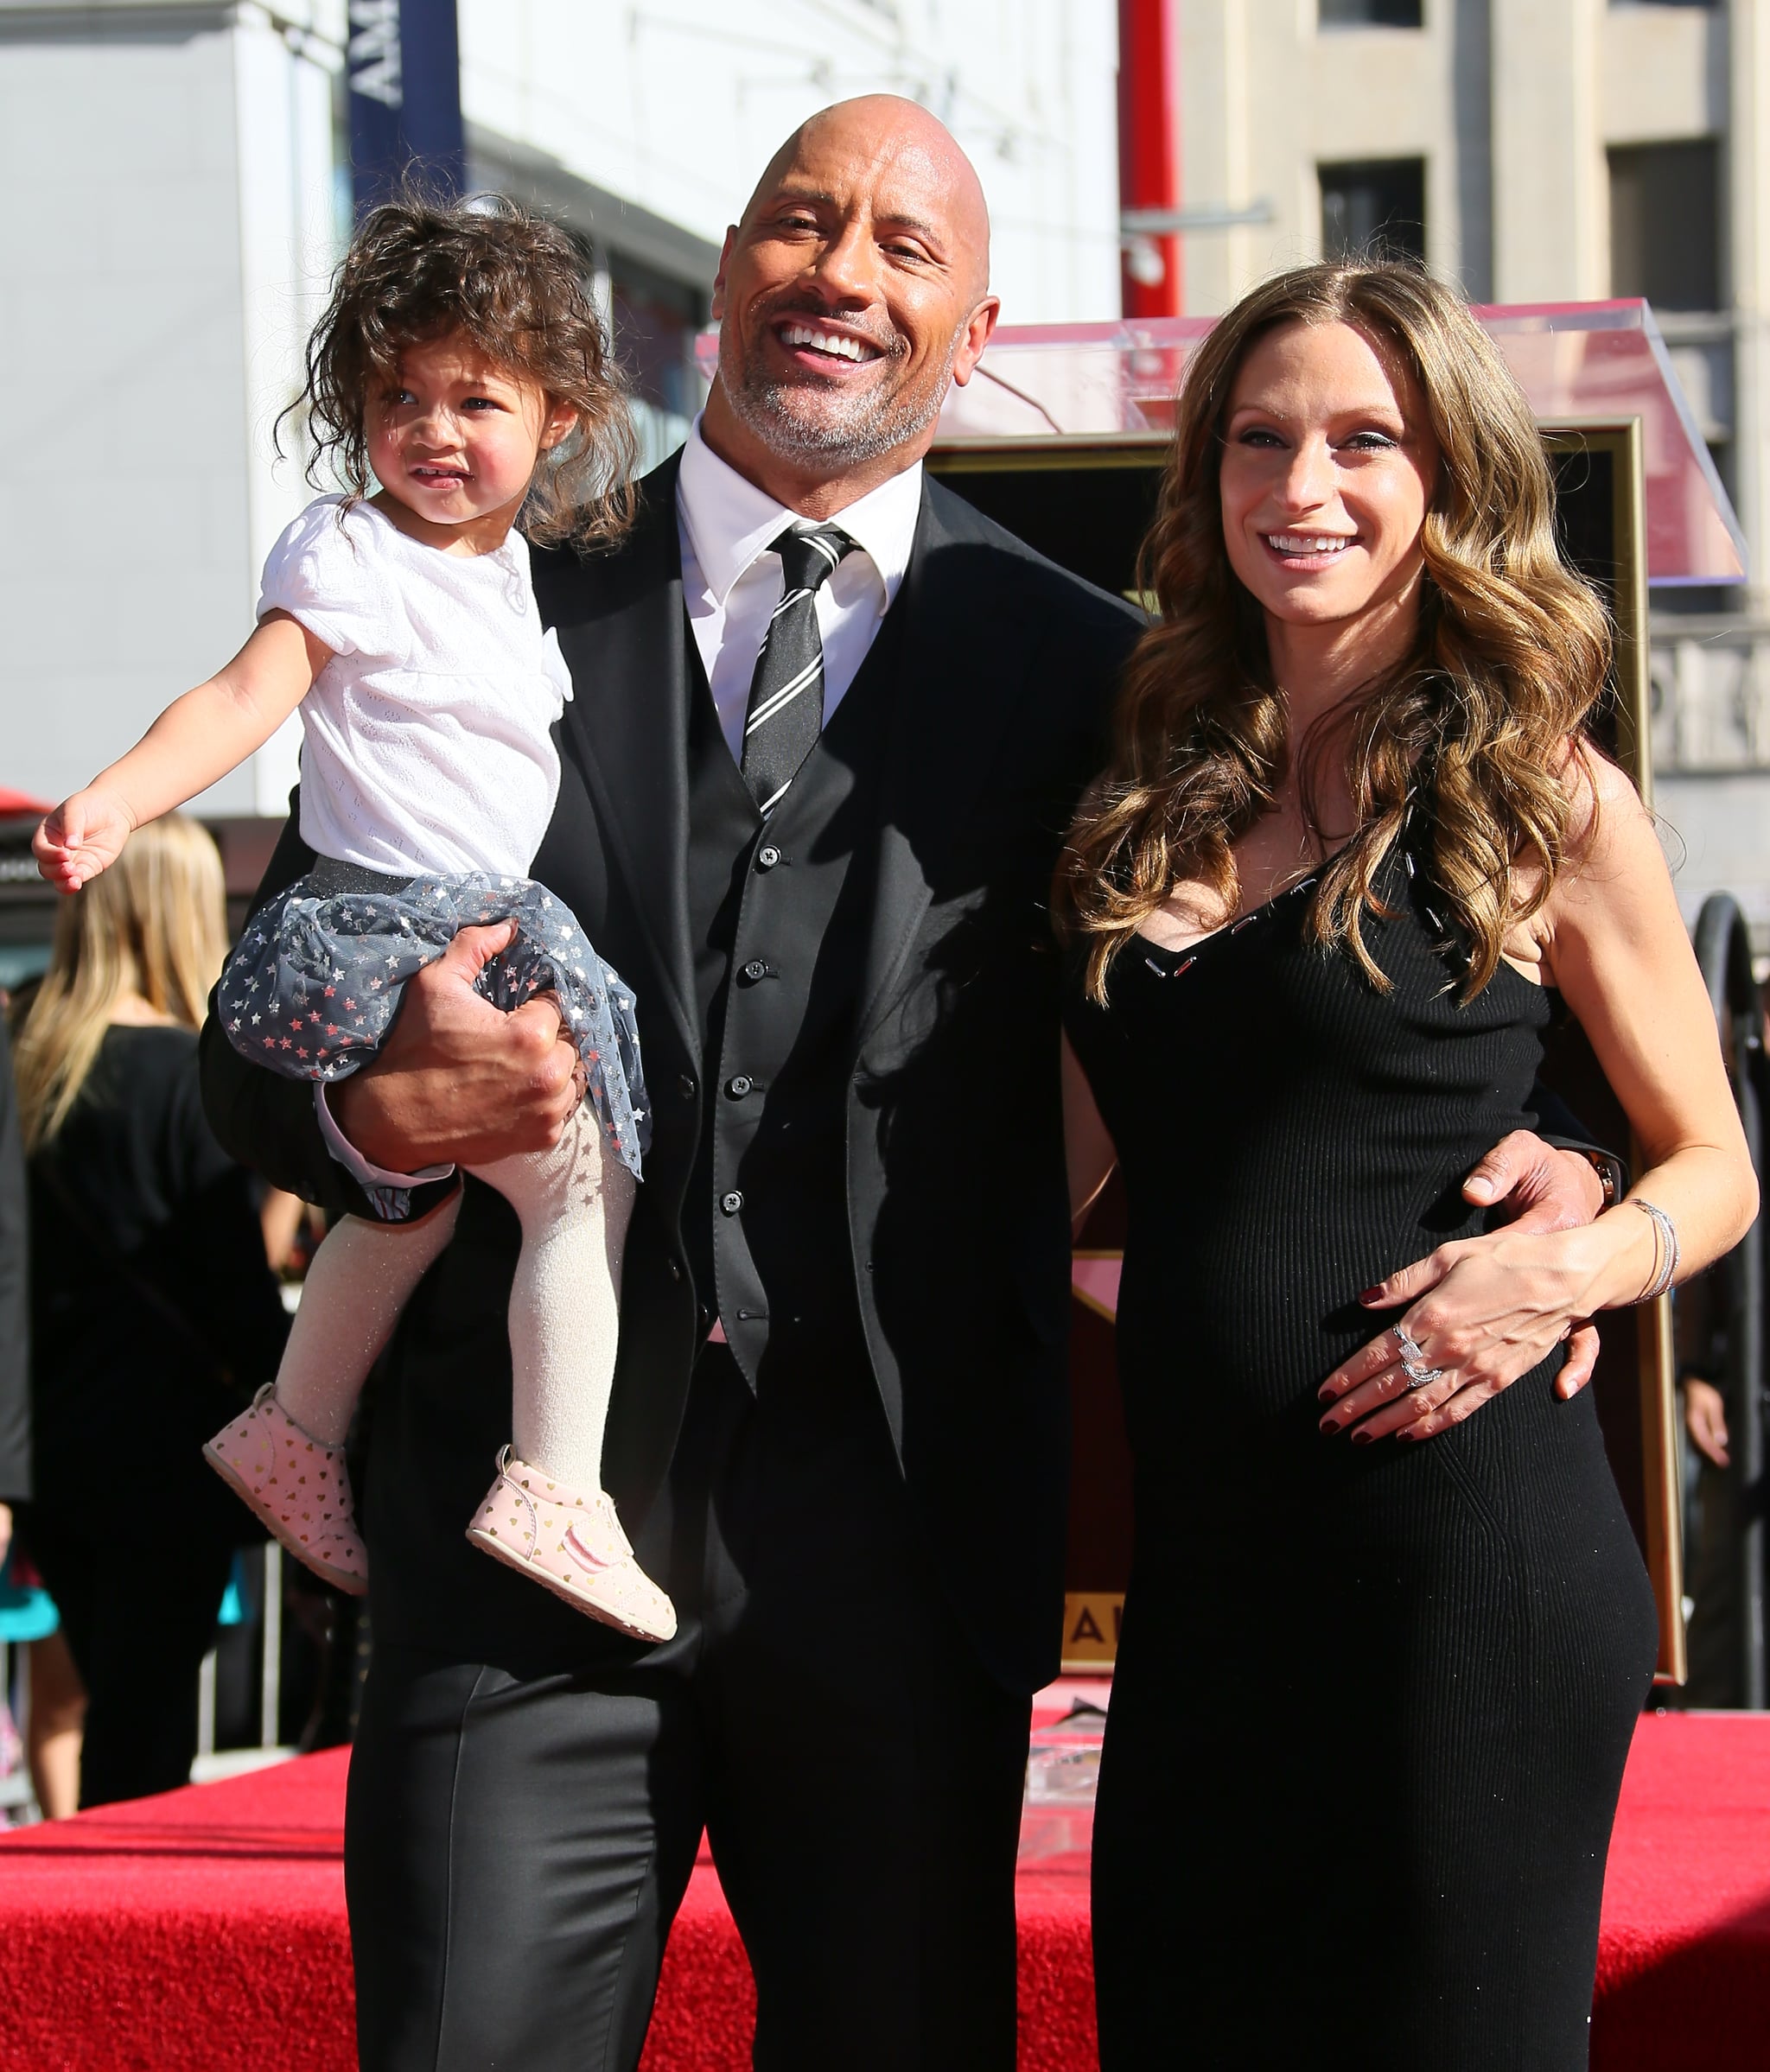 LOS ANGELES, CA - DECEMBER 13: Dwayne Johnson, Lauren Hashian and daughter Jasmine Johnson attend a ceremony honoring him with a star on The Hollywood Walk of Fame on December 13, 2017 in Los Angeles, California. (Photo by JB Lacroix/ WireImage)